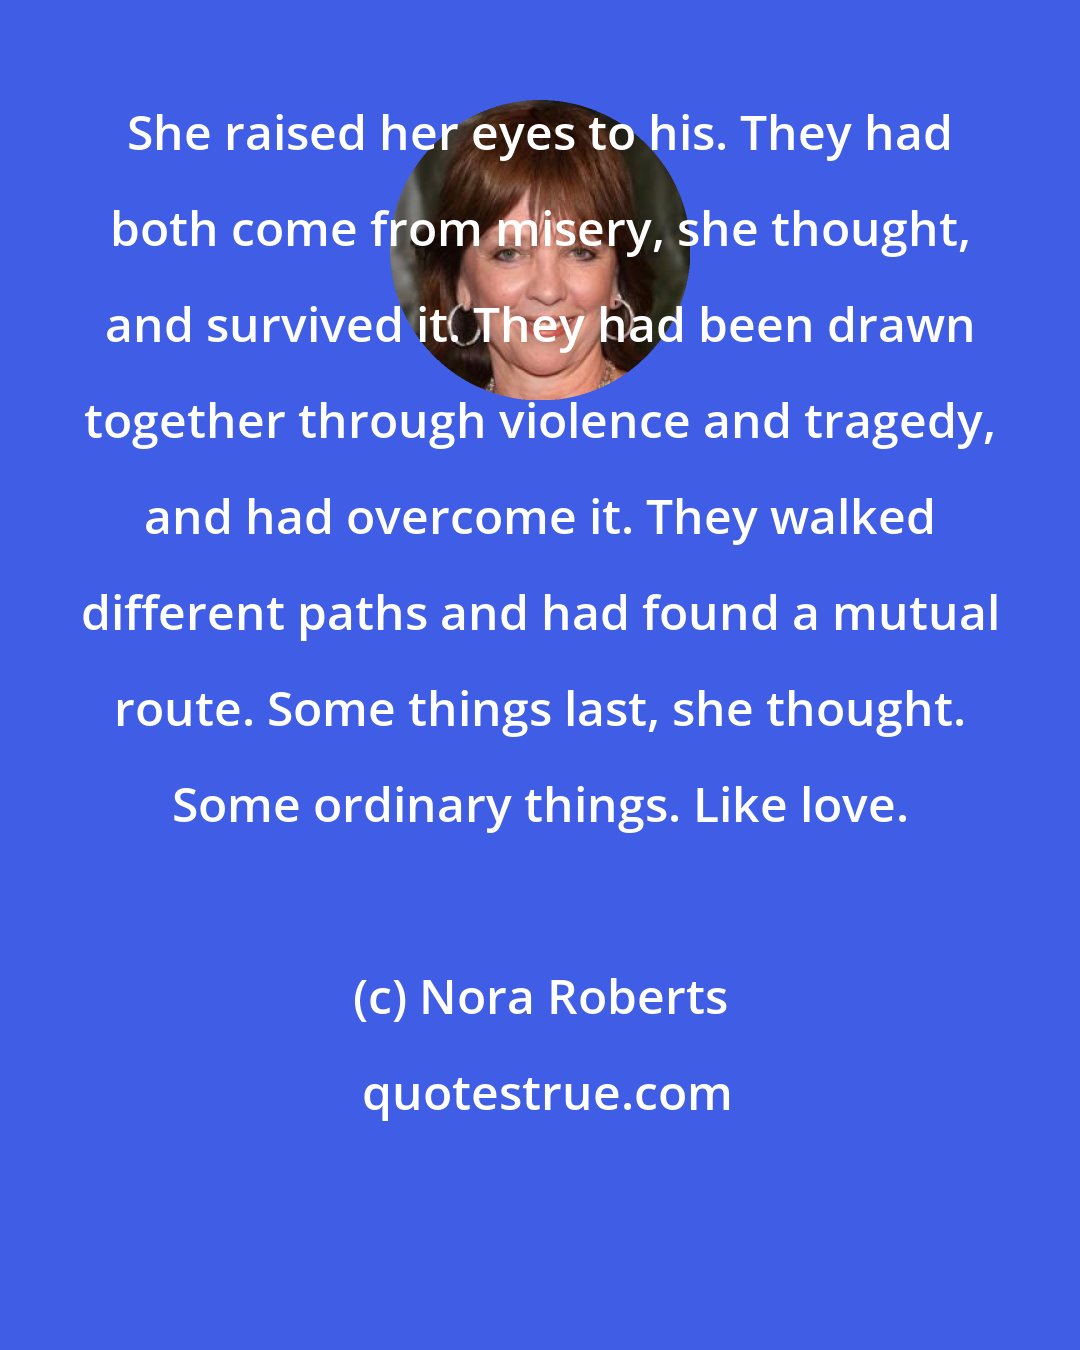 Nora Roberts: She raised her eyes to his. They had both come from misery, she thought, and survived it. They had been drawn together through violence and tragedy, and had overcome it. They walked different paths and had found a mutual route. Some things last, she thought. Some ordinary things. Like love.